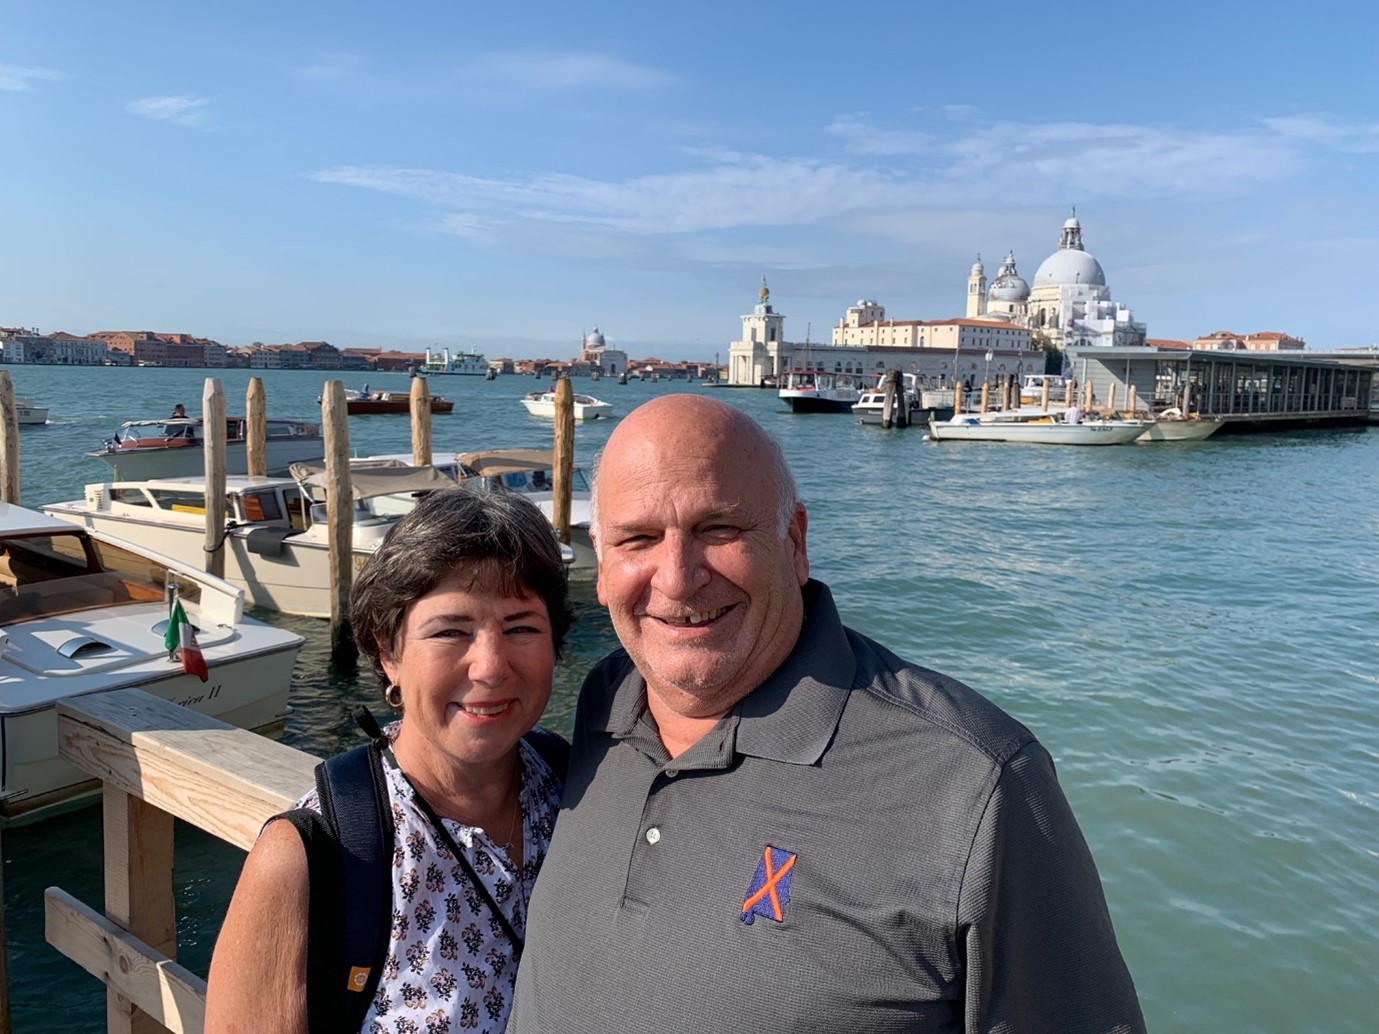 Couple standing by the canal in Venice